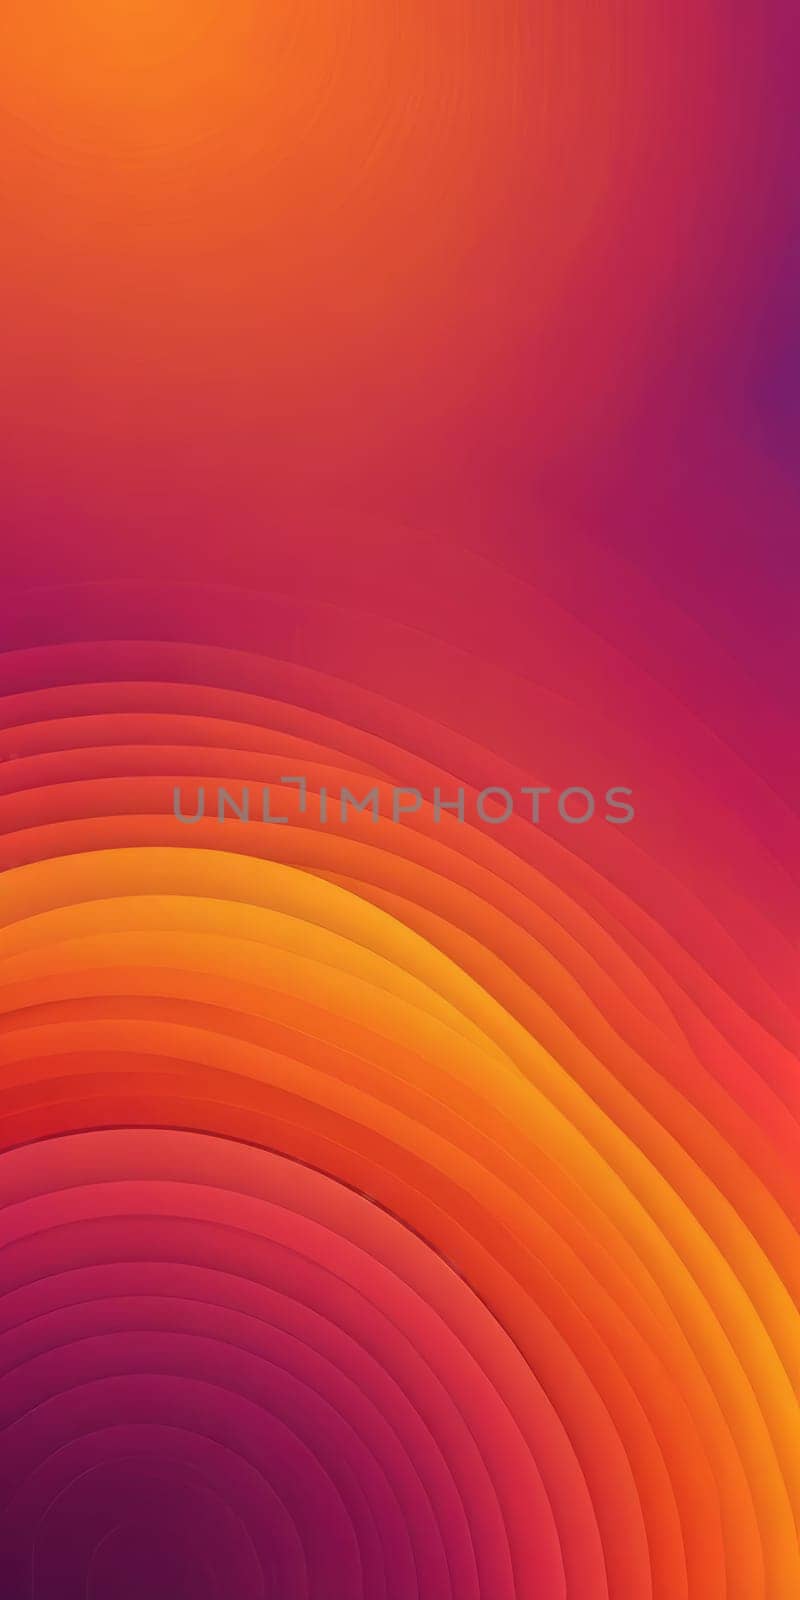 Concentric Shapes in Orange and Plum by nkotlyar